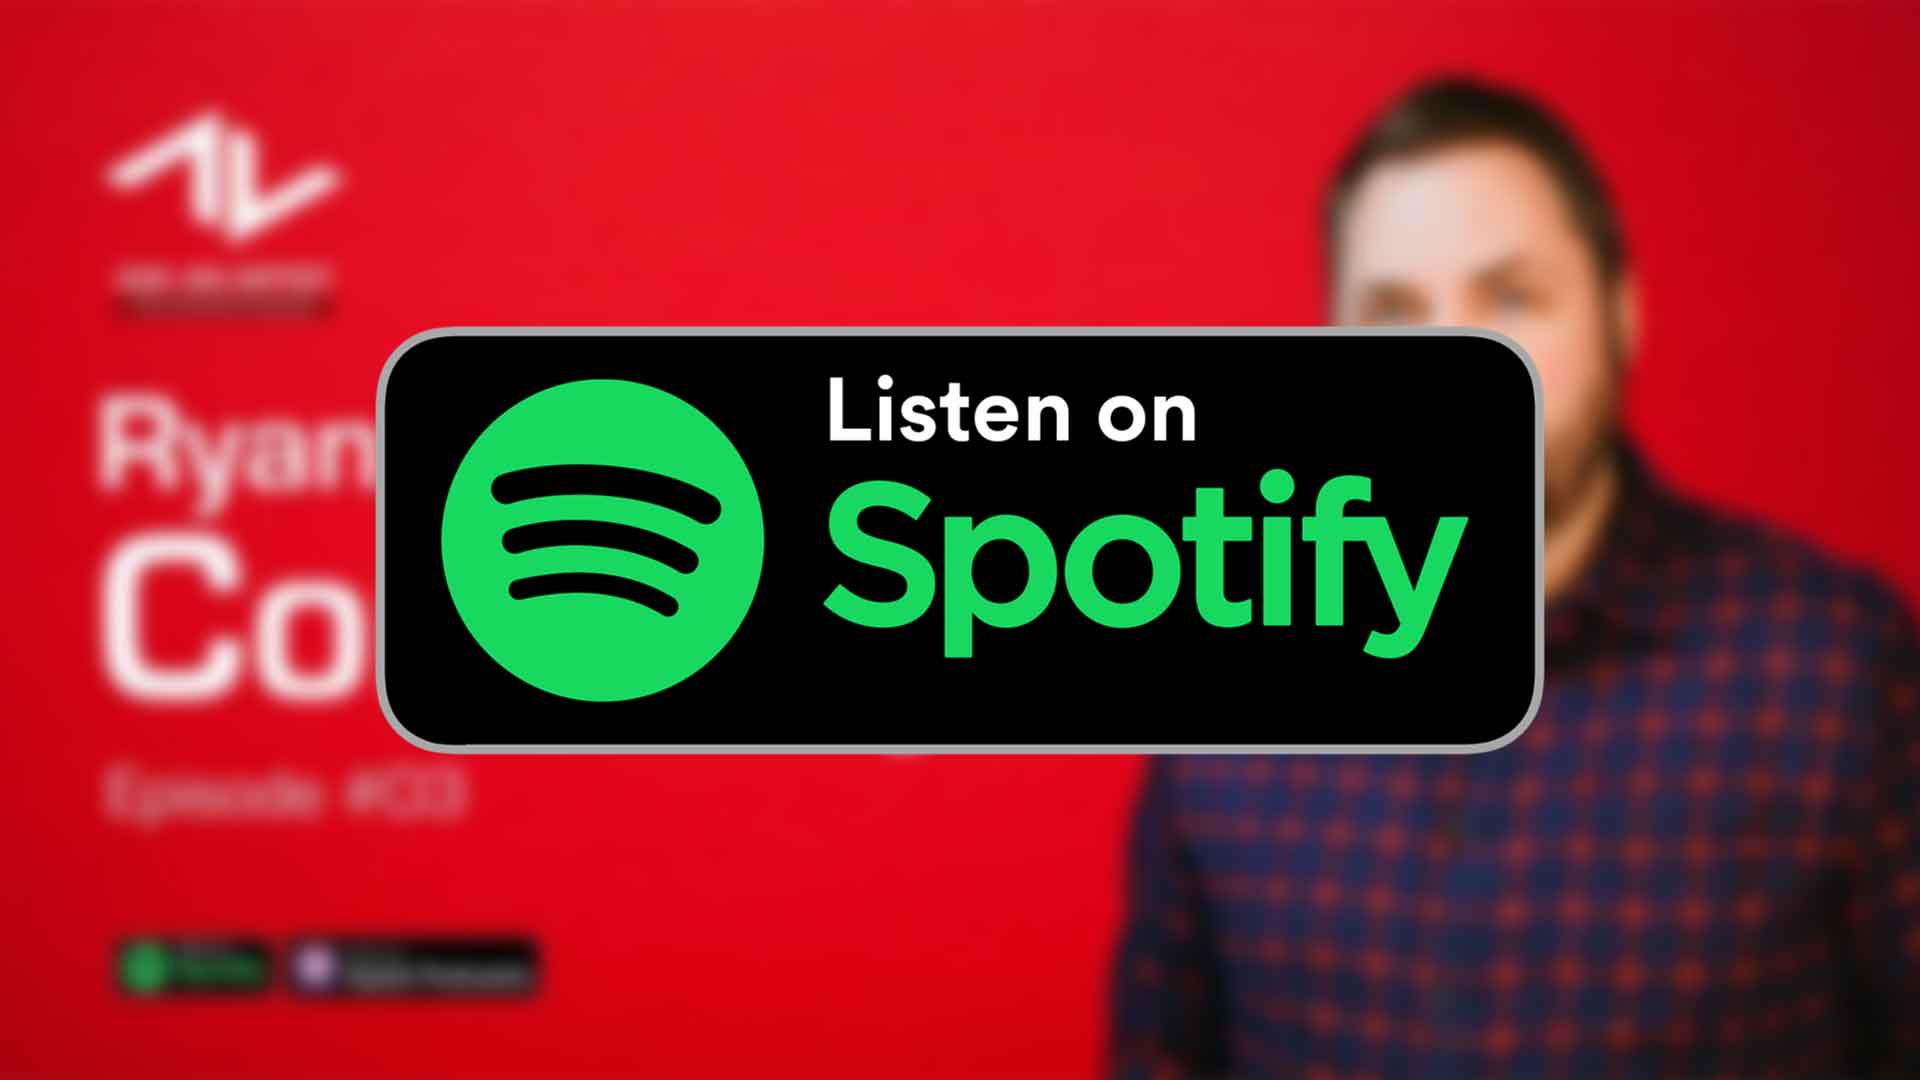 Listen to episode three with Ryan Connolly on Spotify.